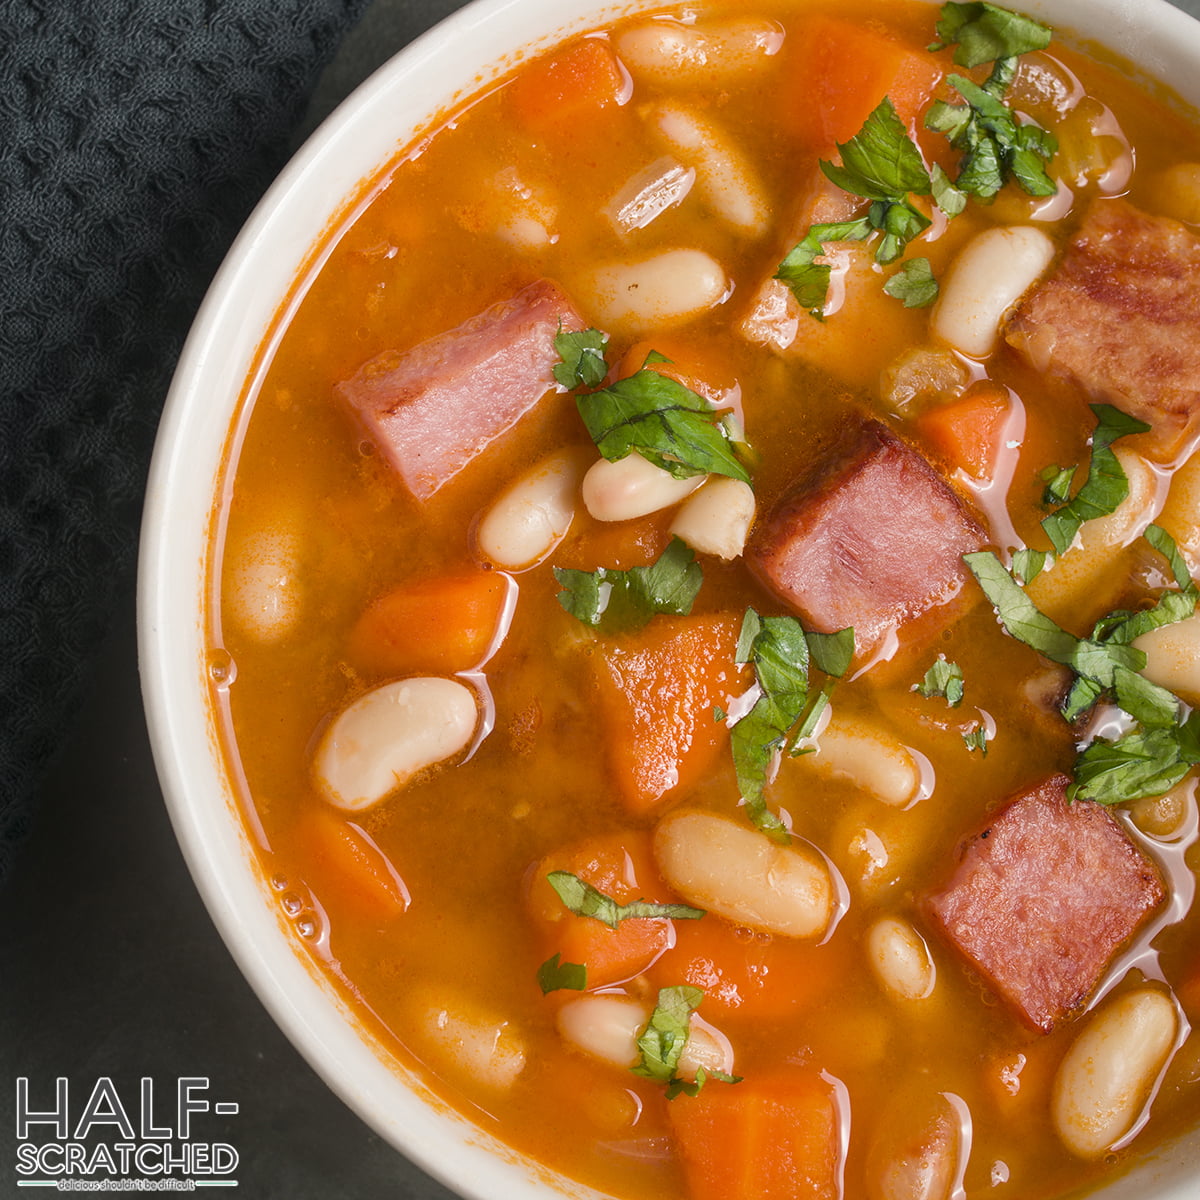 Pioneer Woman's ham and bean soup